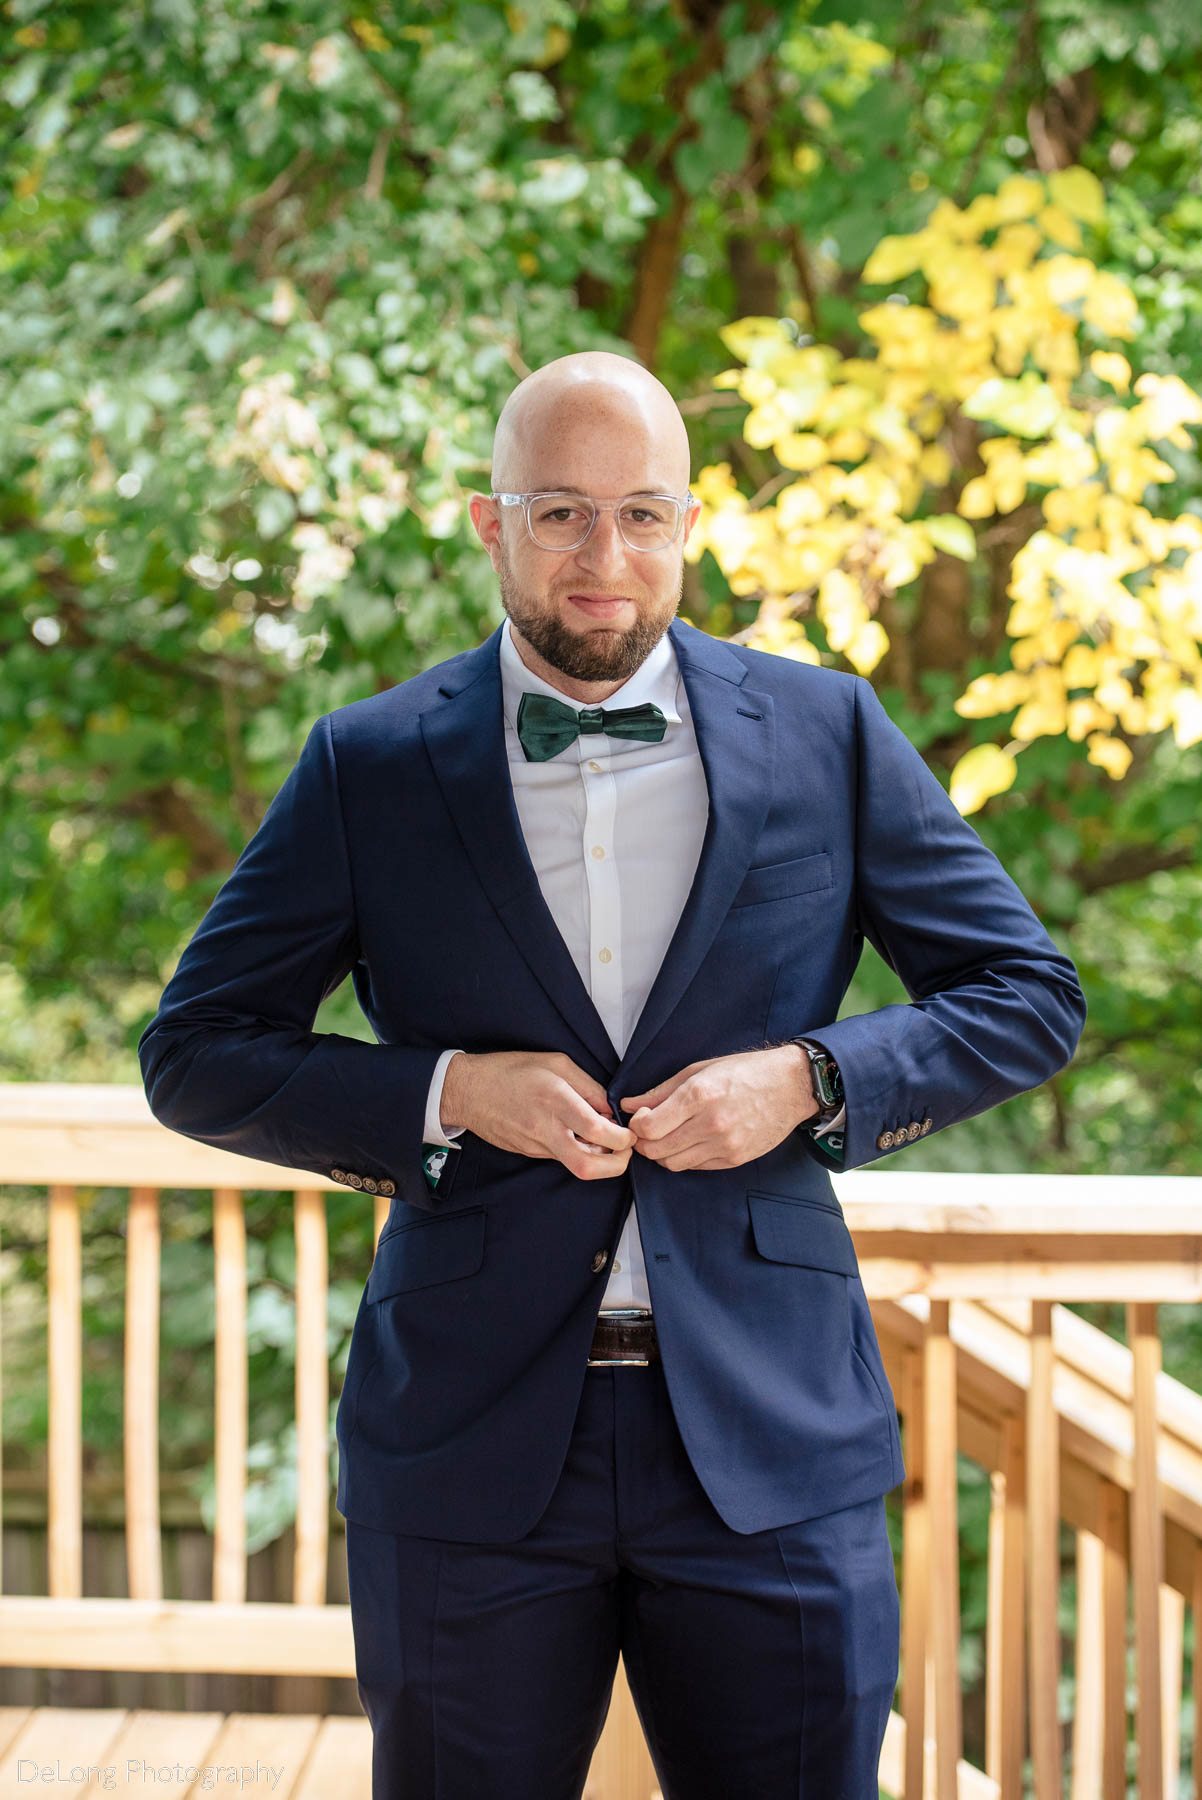 Portrait of groom buttoning his jacket by Charlotte wedding photographers DeLong Photography